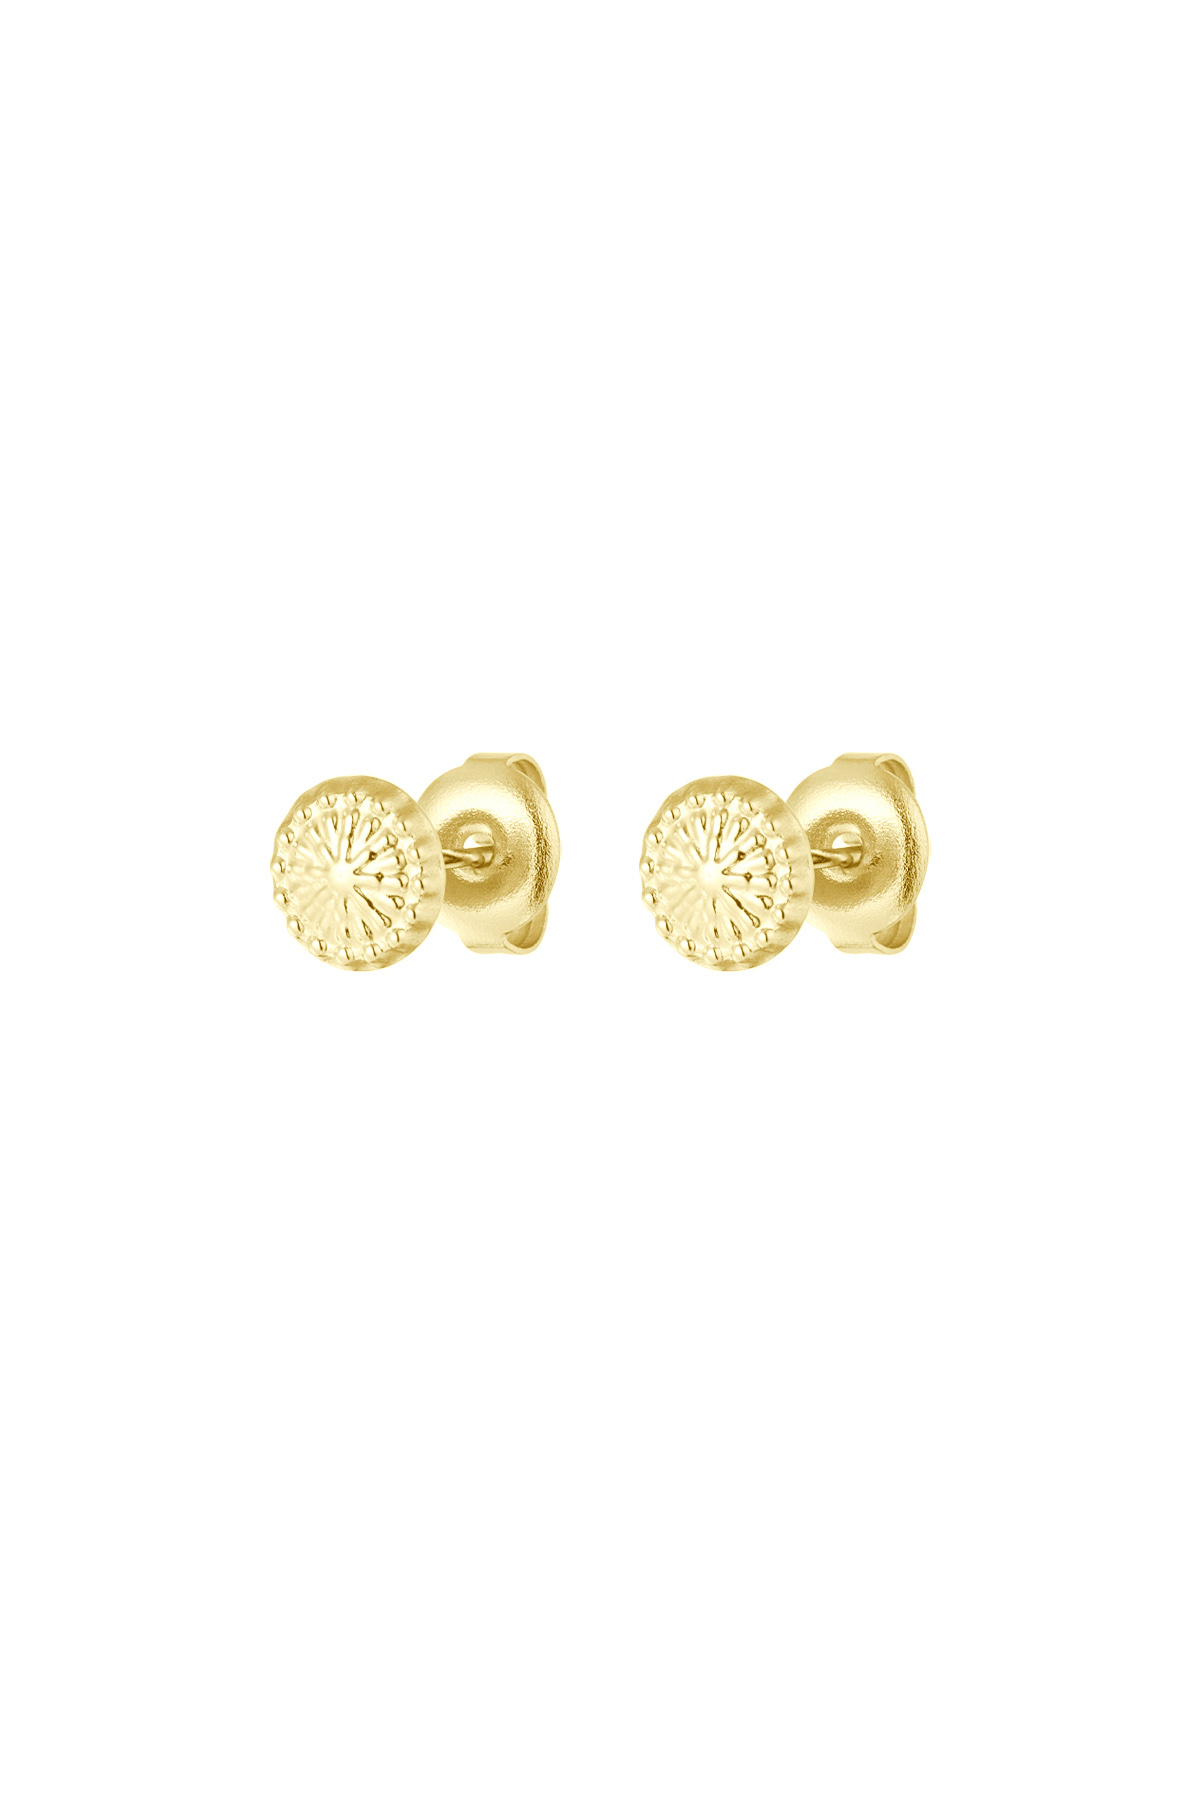 Chic, round stud earrings - gold